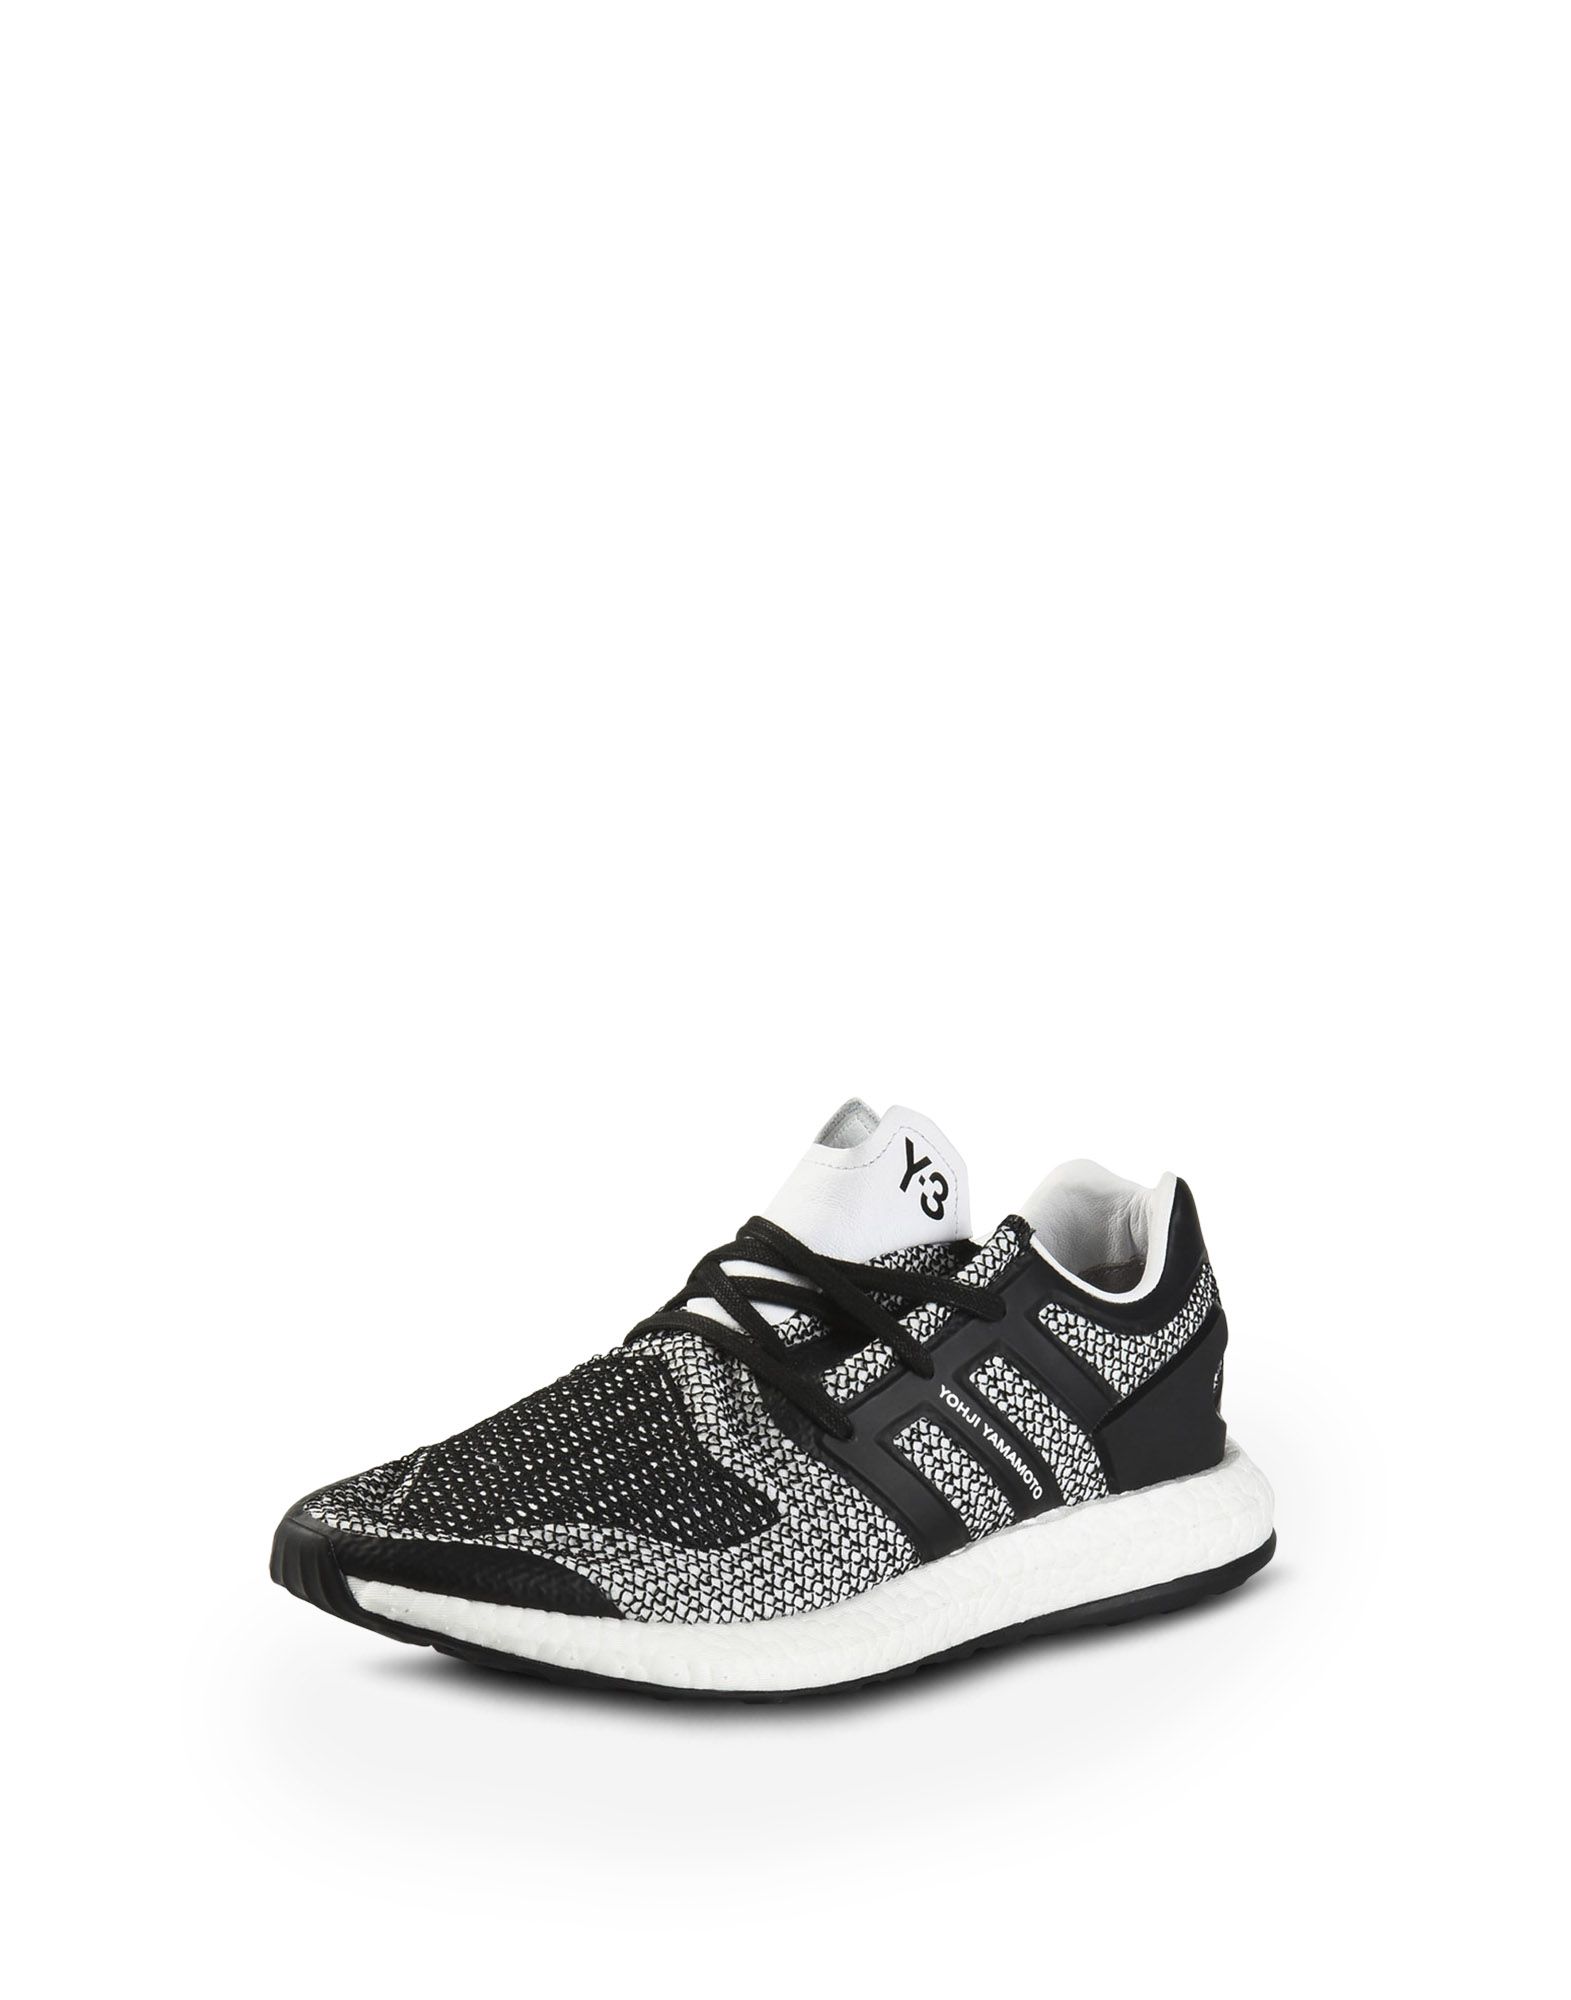 Y-3 PureBoost Sneakers for Women | Adidas Y-3 Official Store